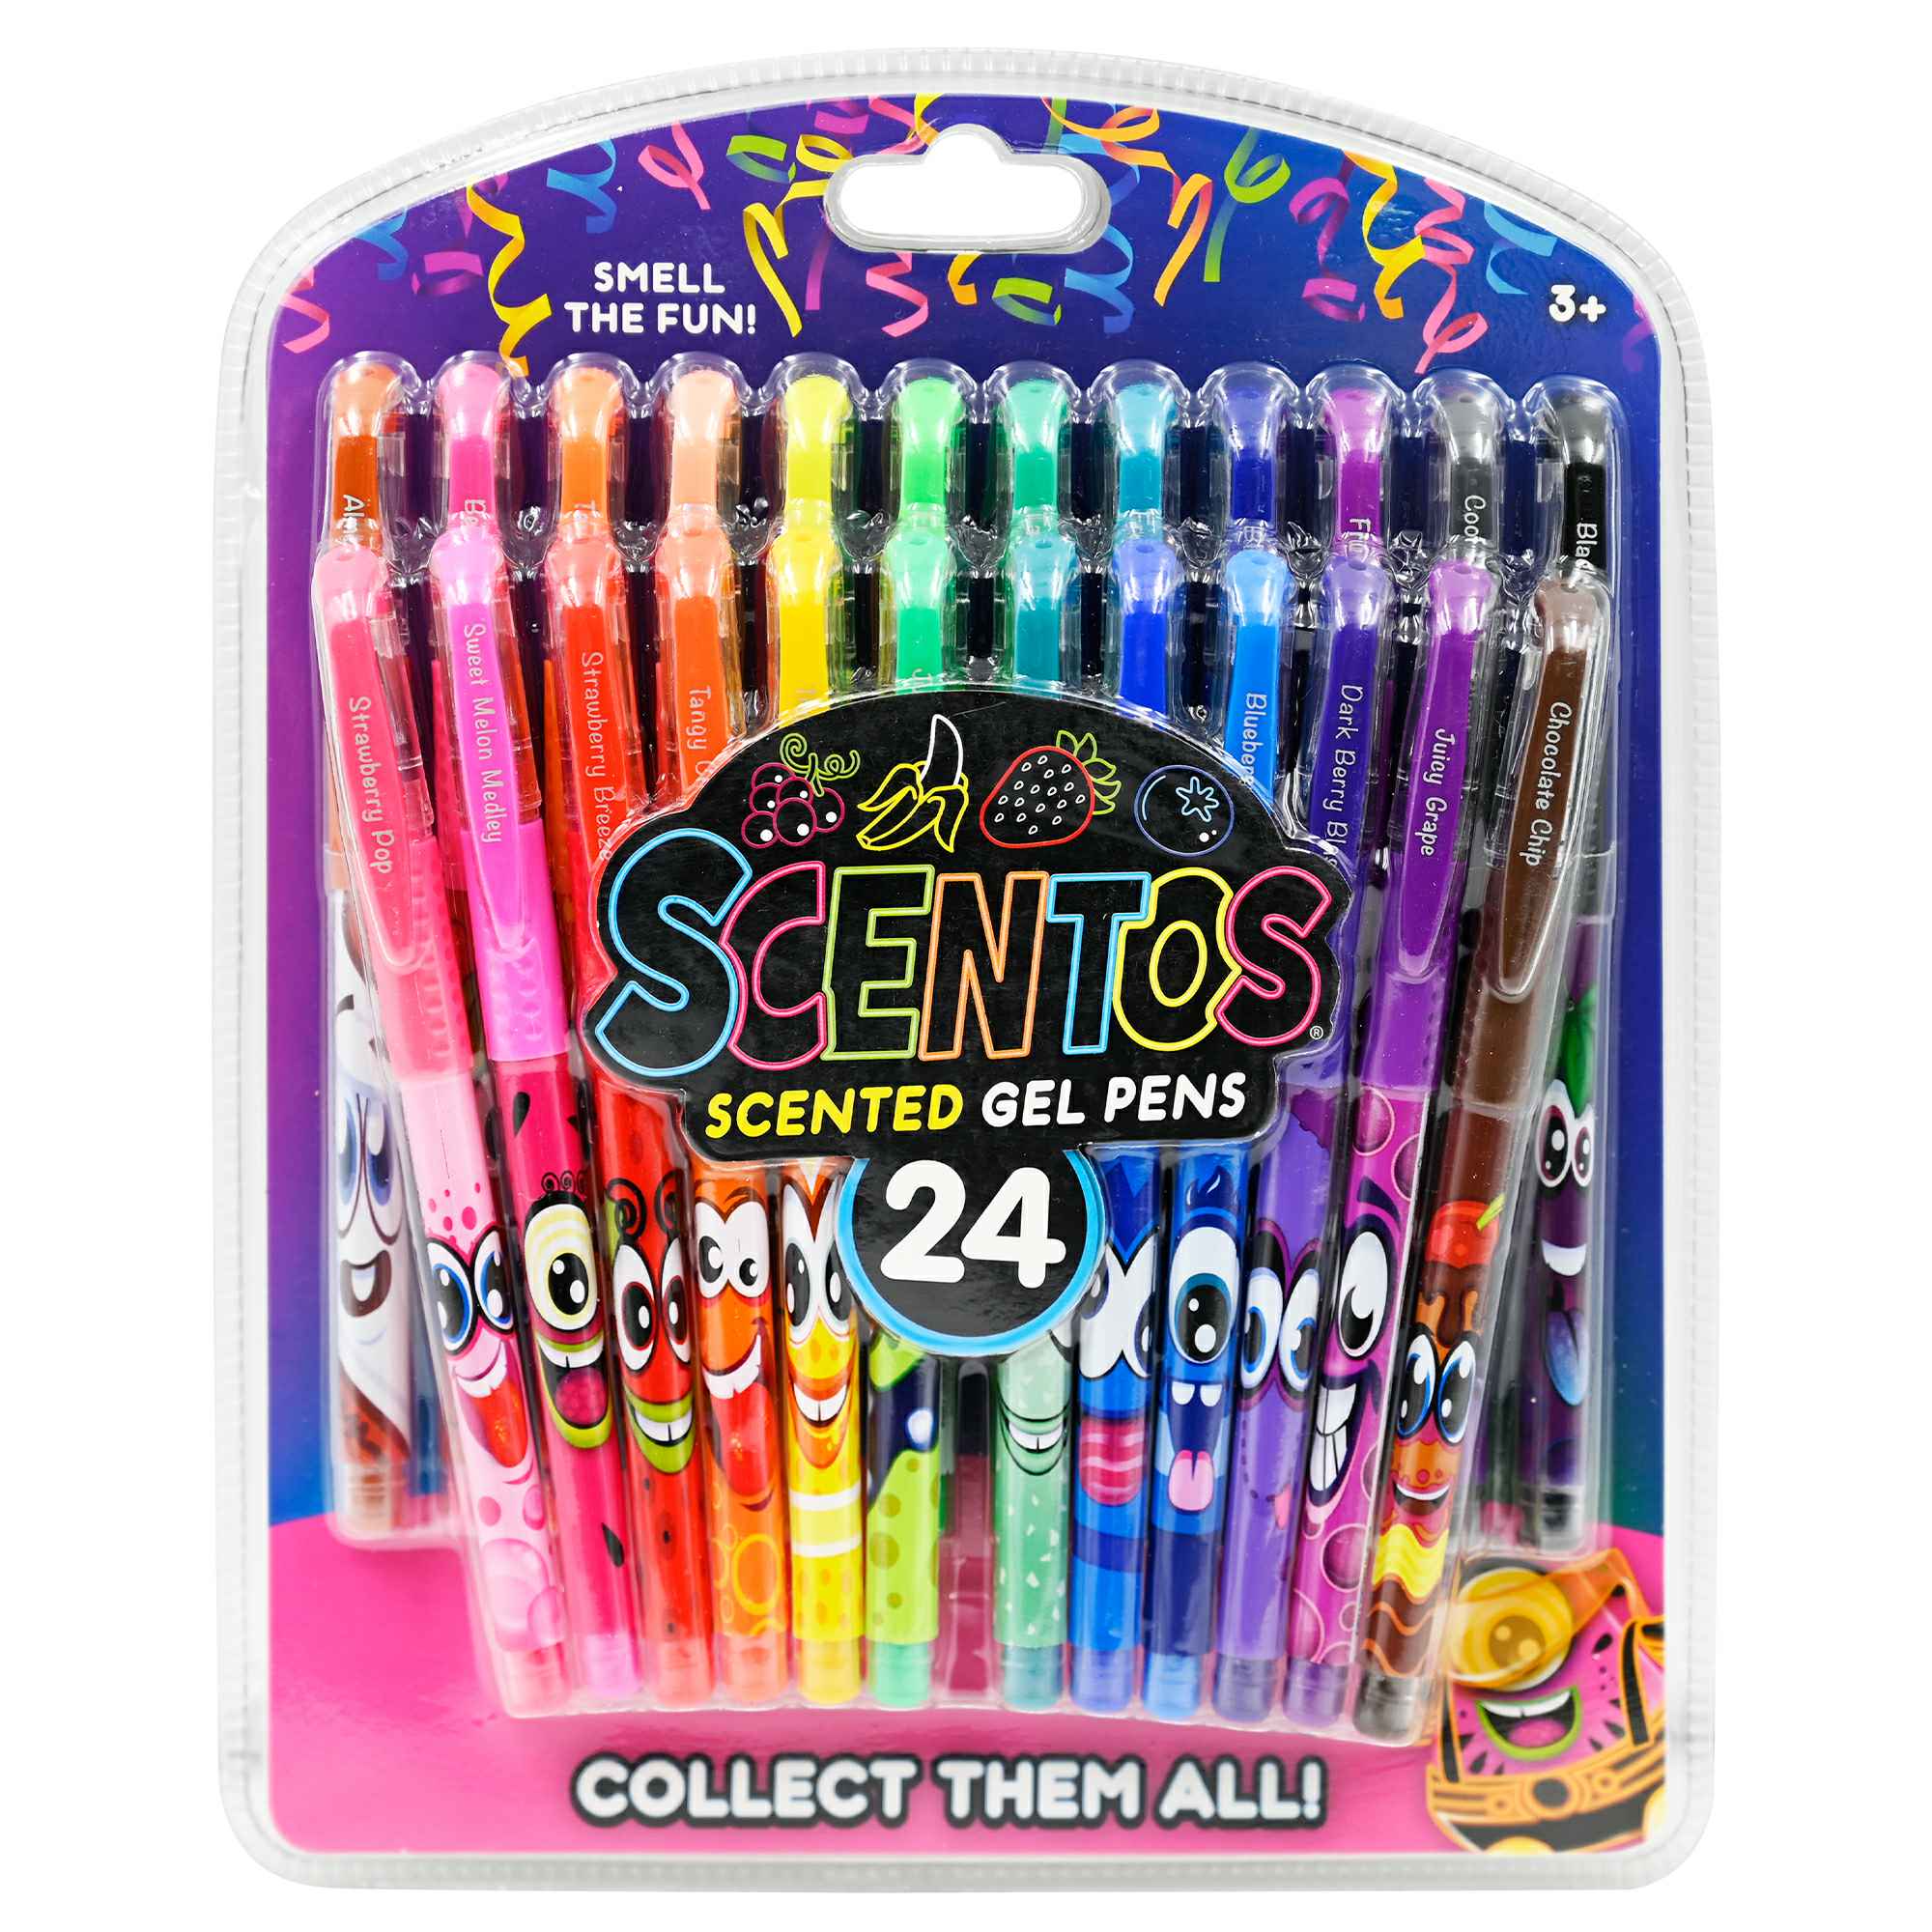 Scentos Scented Gel Pens for Kids - Assorted Colorful Pens - Fine Point Gel  Pen Set - For Ages 3 and Up - 8 Count (Glitter)